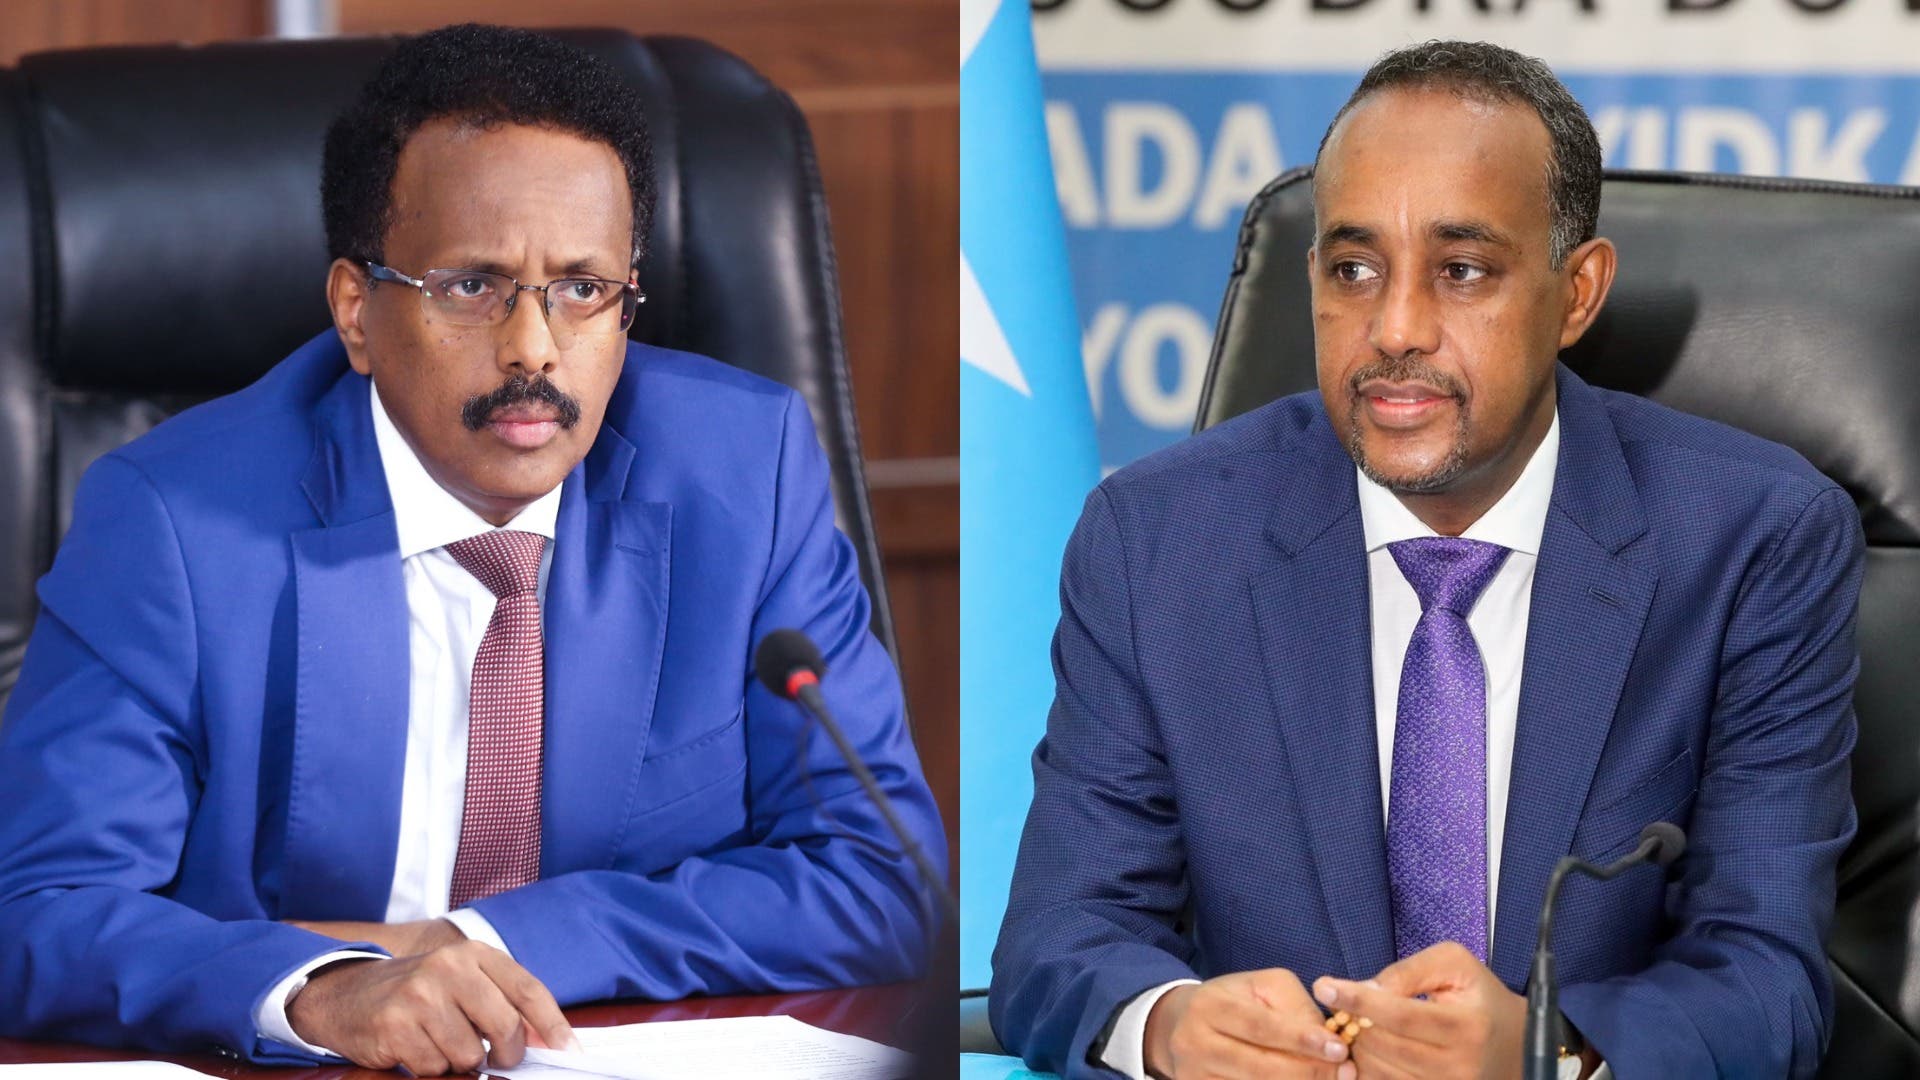 Somalia’s PM accuses president of ‘coup attempt’